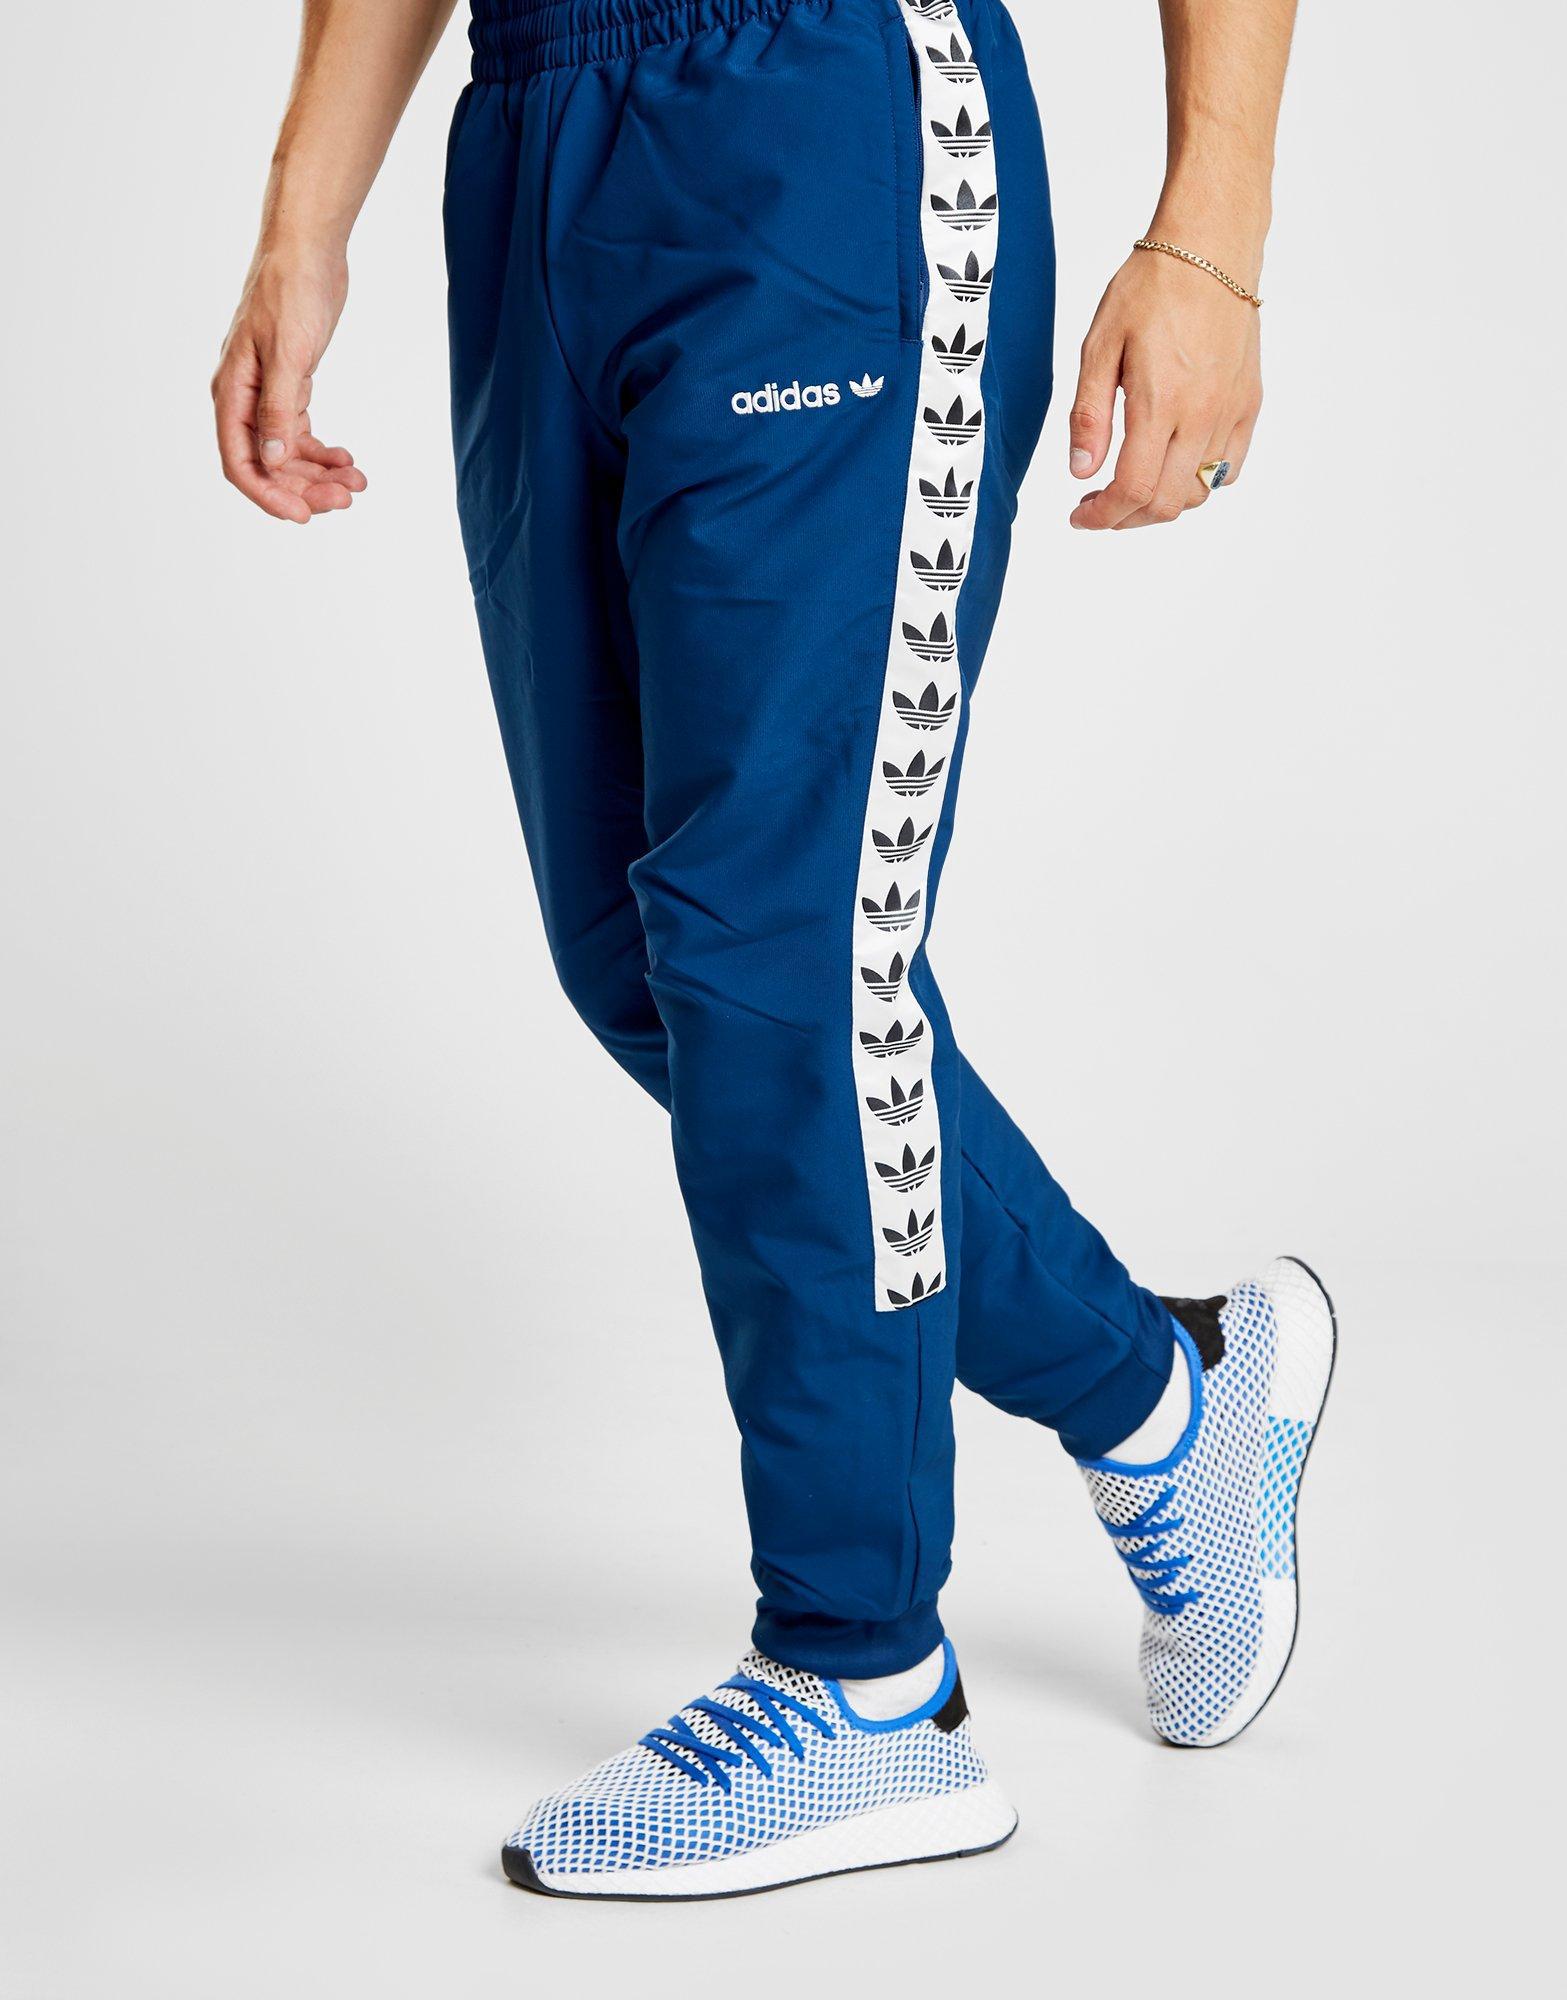 adidas Originals Synthetic Tape Woven Track Pants in Blue/White (Blue ...